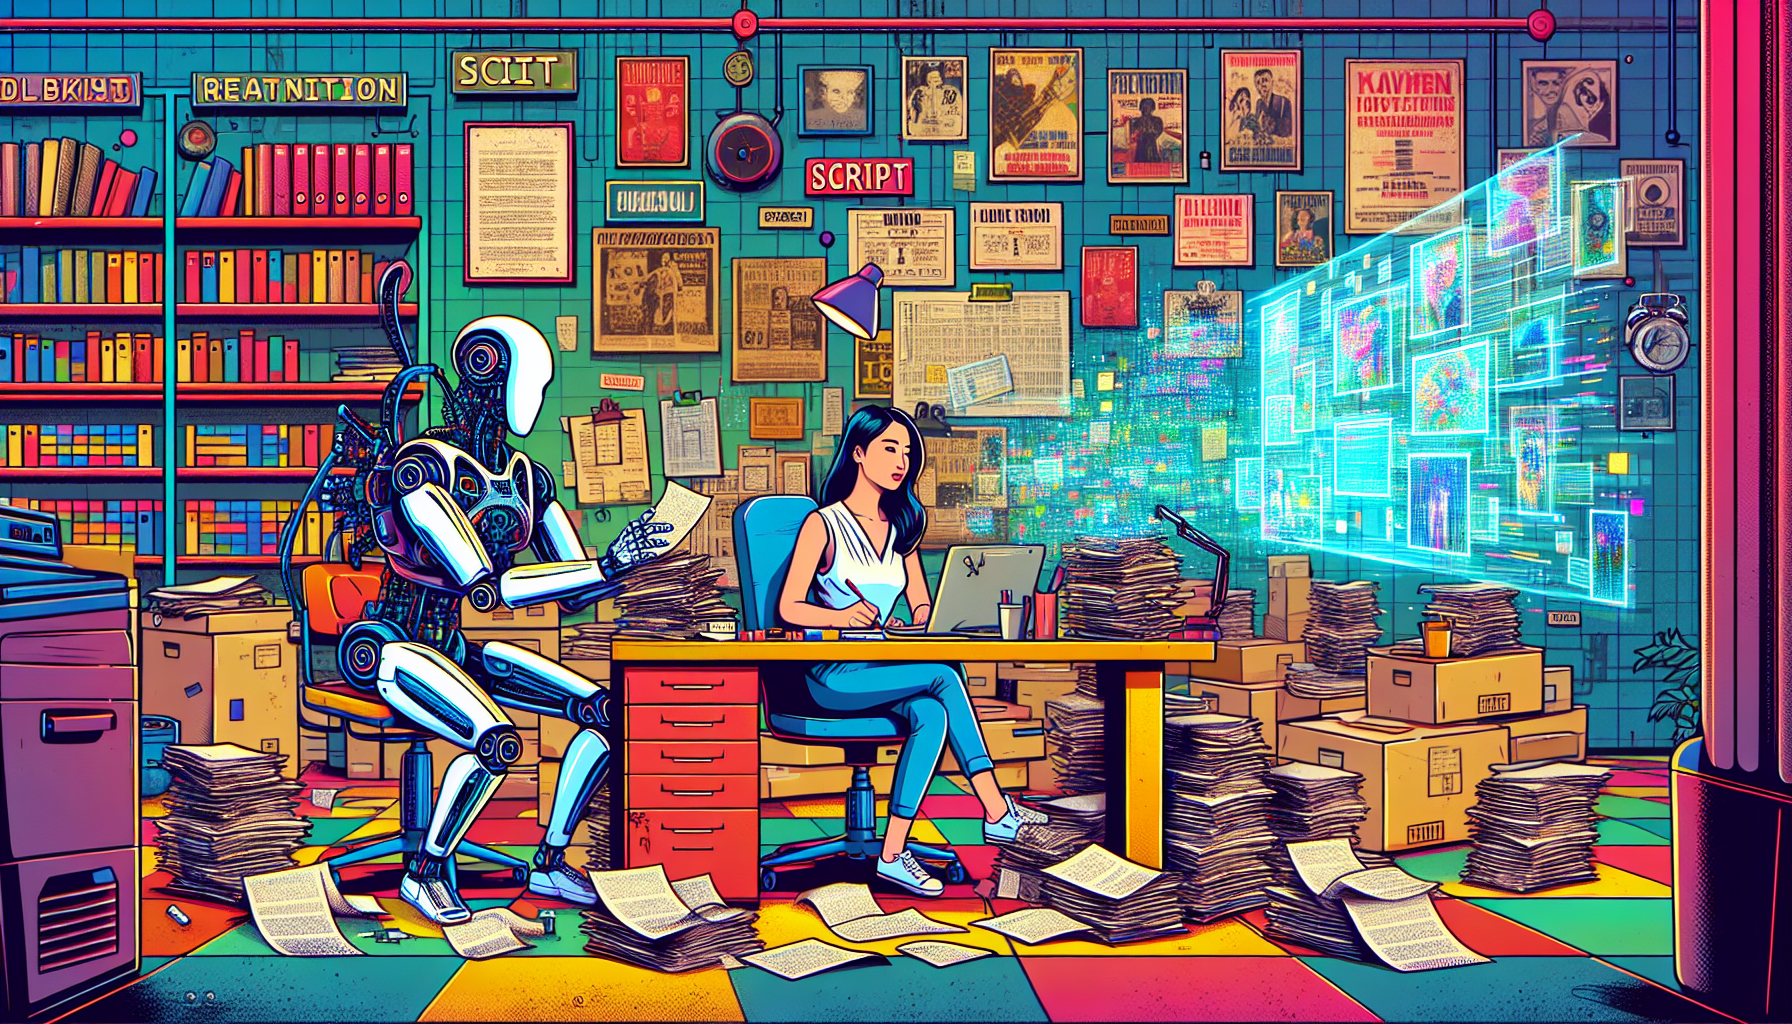 A retro-futuristic office space where a human screenwriter and an AI robot are collaborating at a large, cluttered desk filled with various film scripts and old movie posters on the walls. The human i